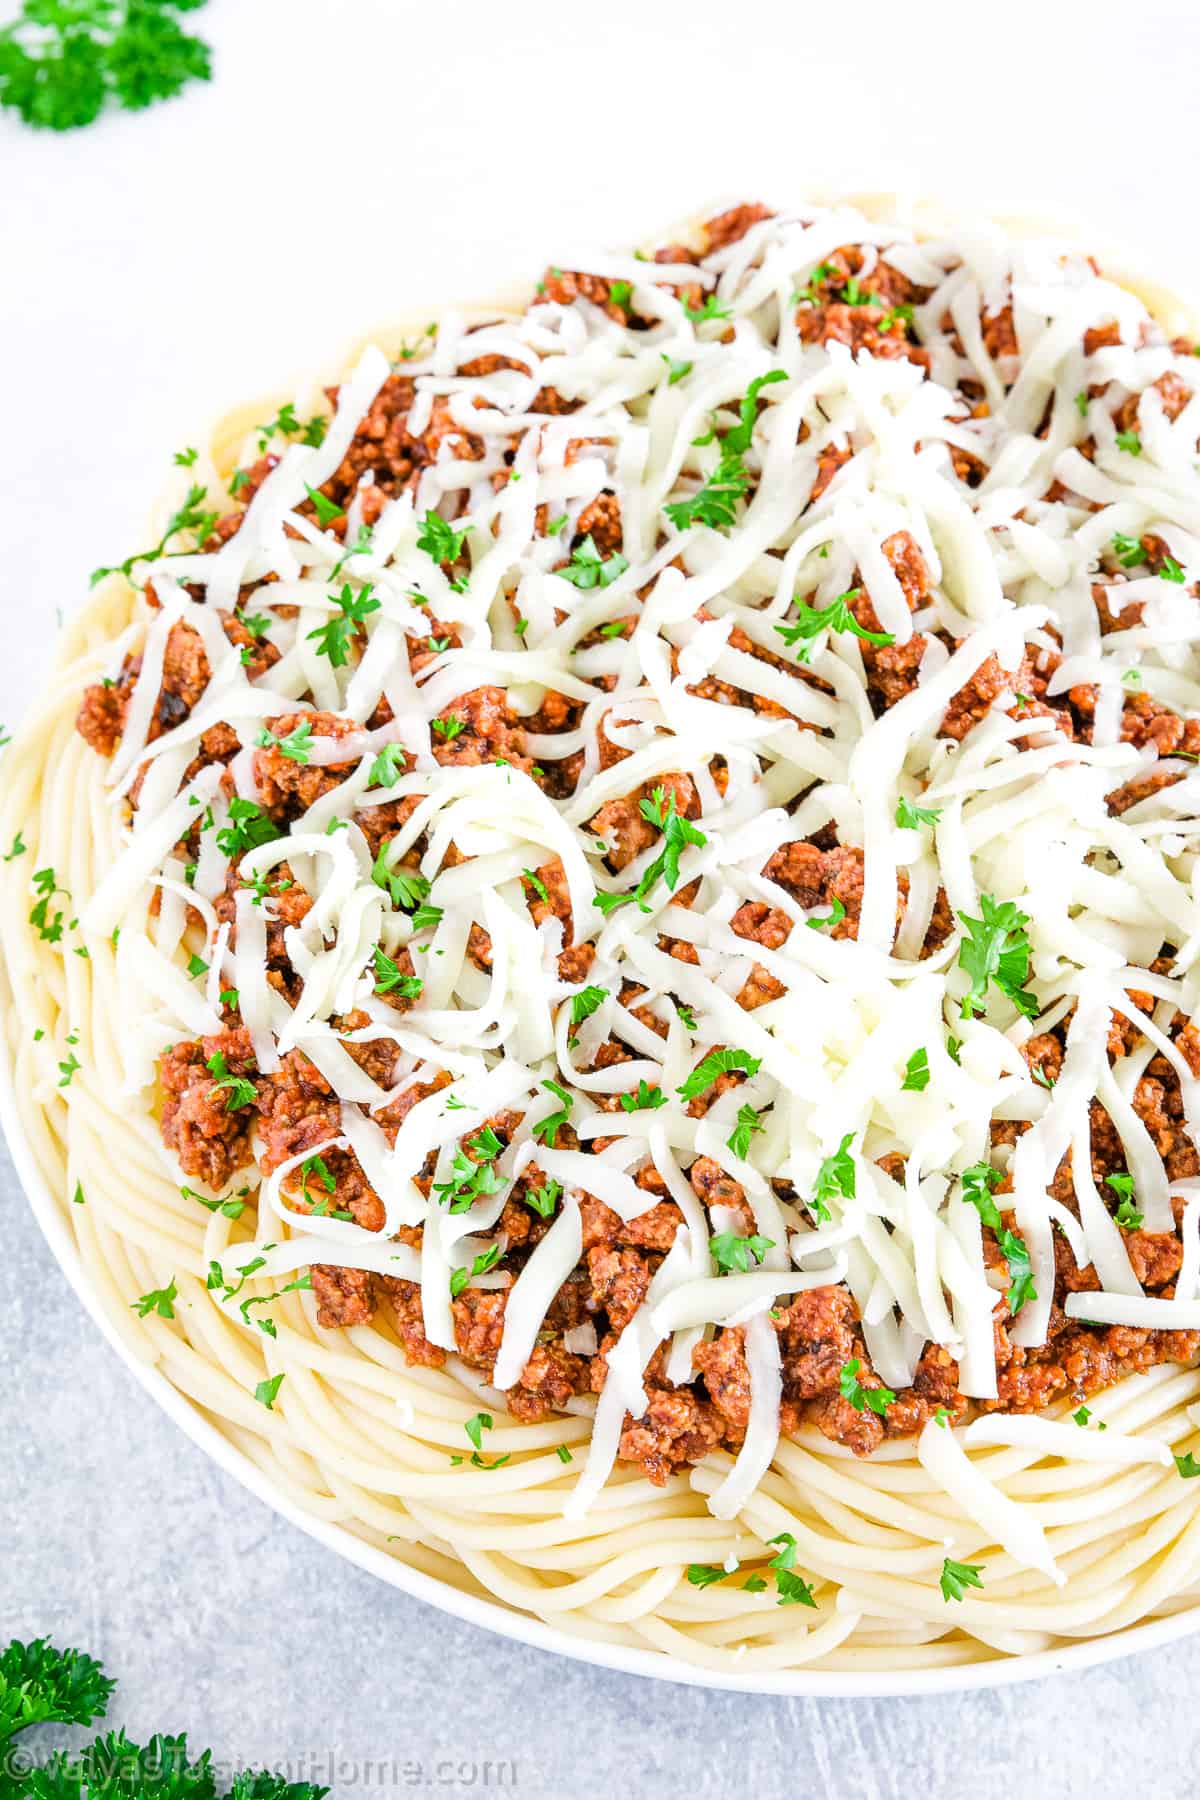 Pasta with meat sauce is a classic Italian dish that consists of cooked pasta topped with meat sauce and melted cheese.